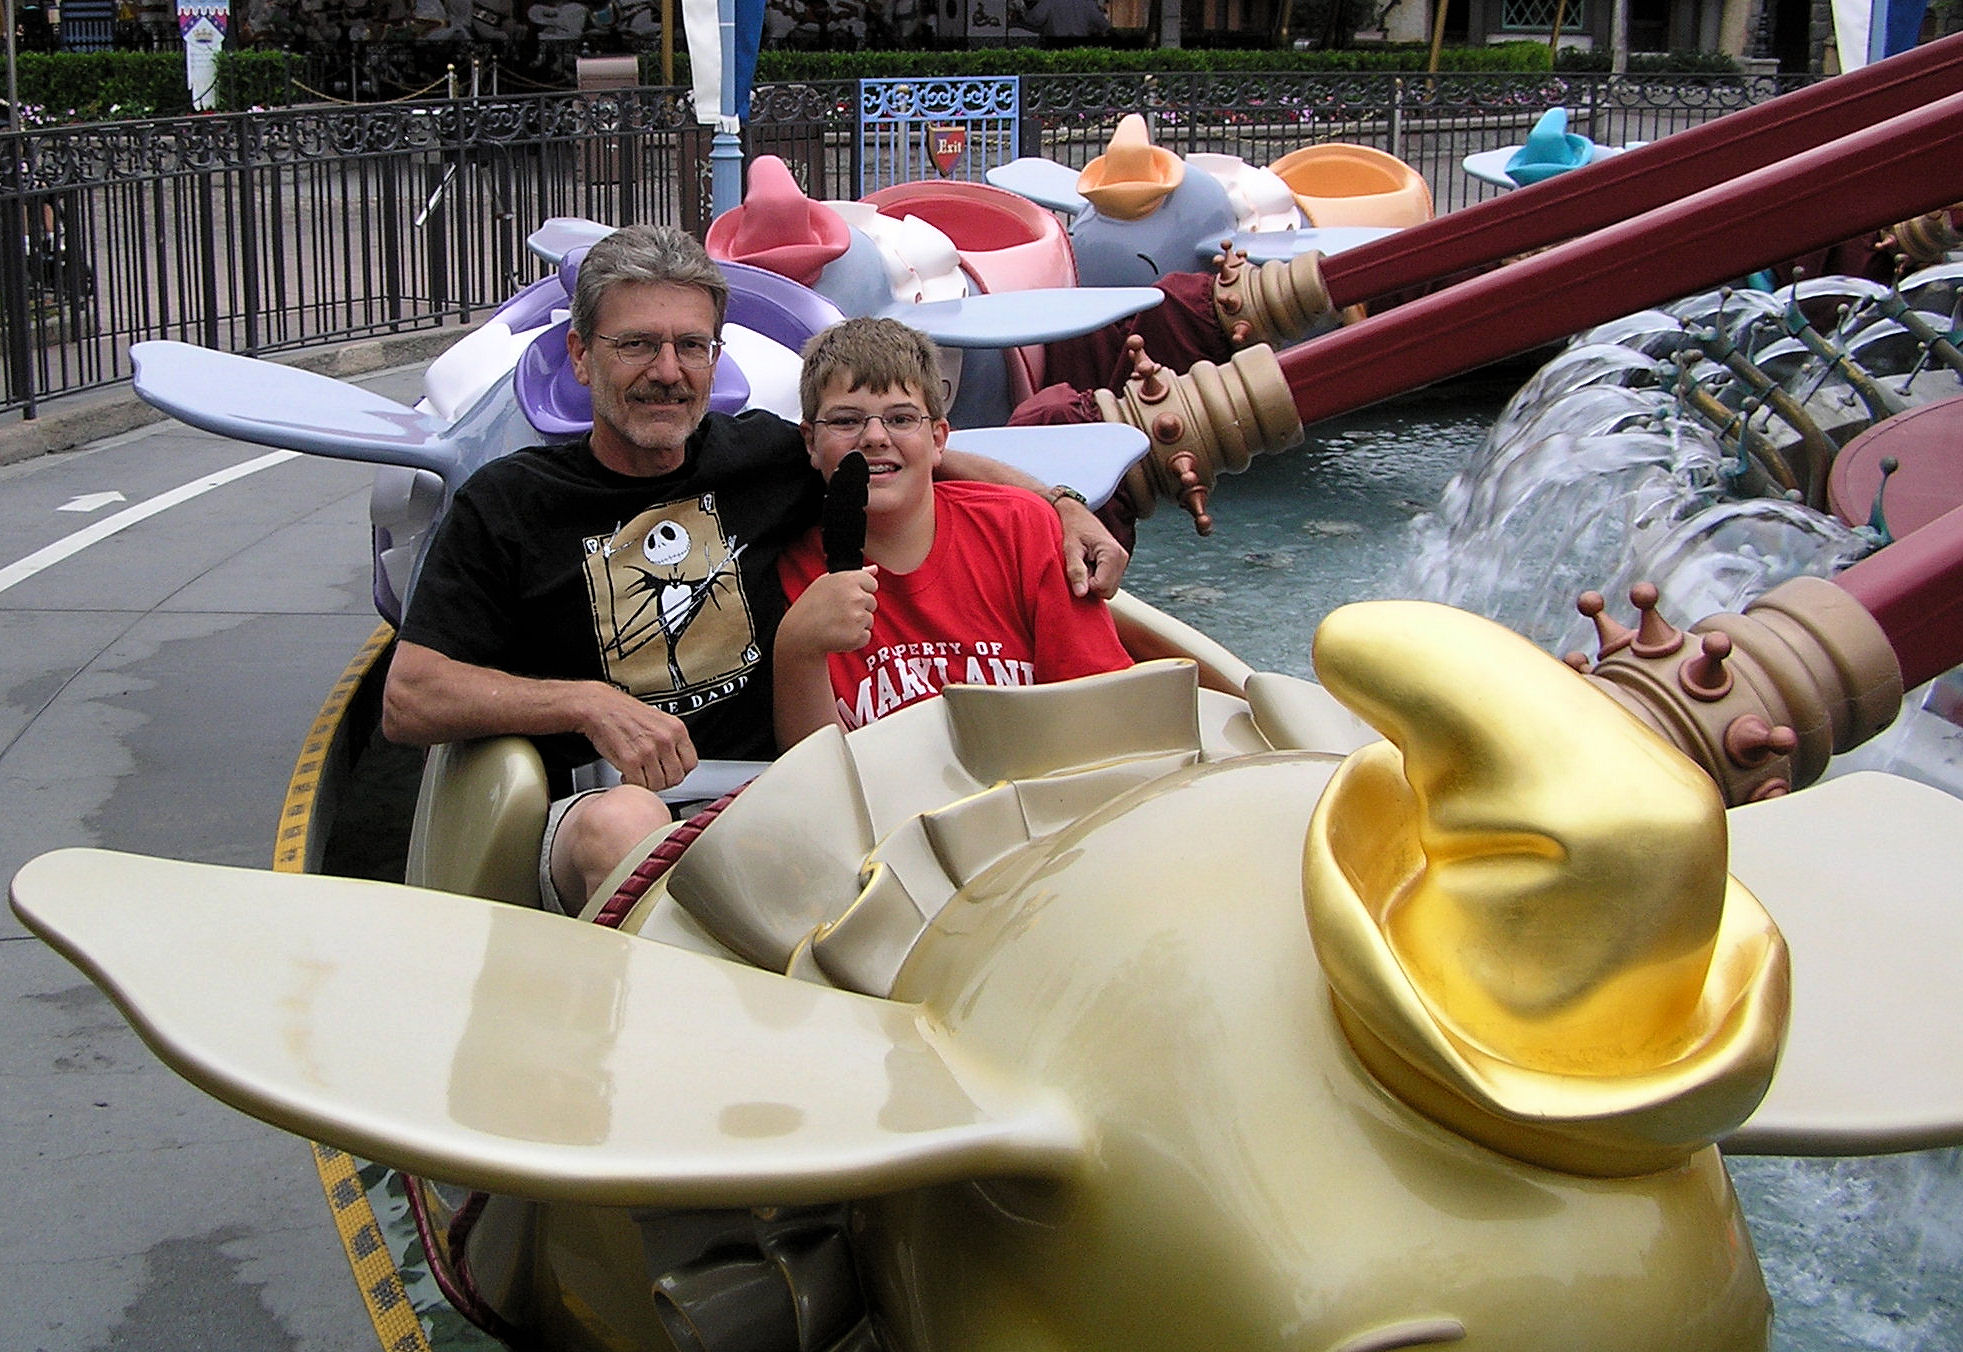 One of my favorite pictures ever, Dad and I in the golden Dumbo at Disneyland with the magic feather. (It was early in the morning and we were the only ones on the ride.)